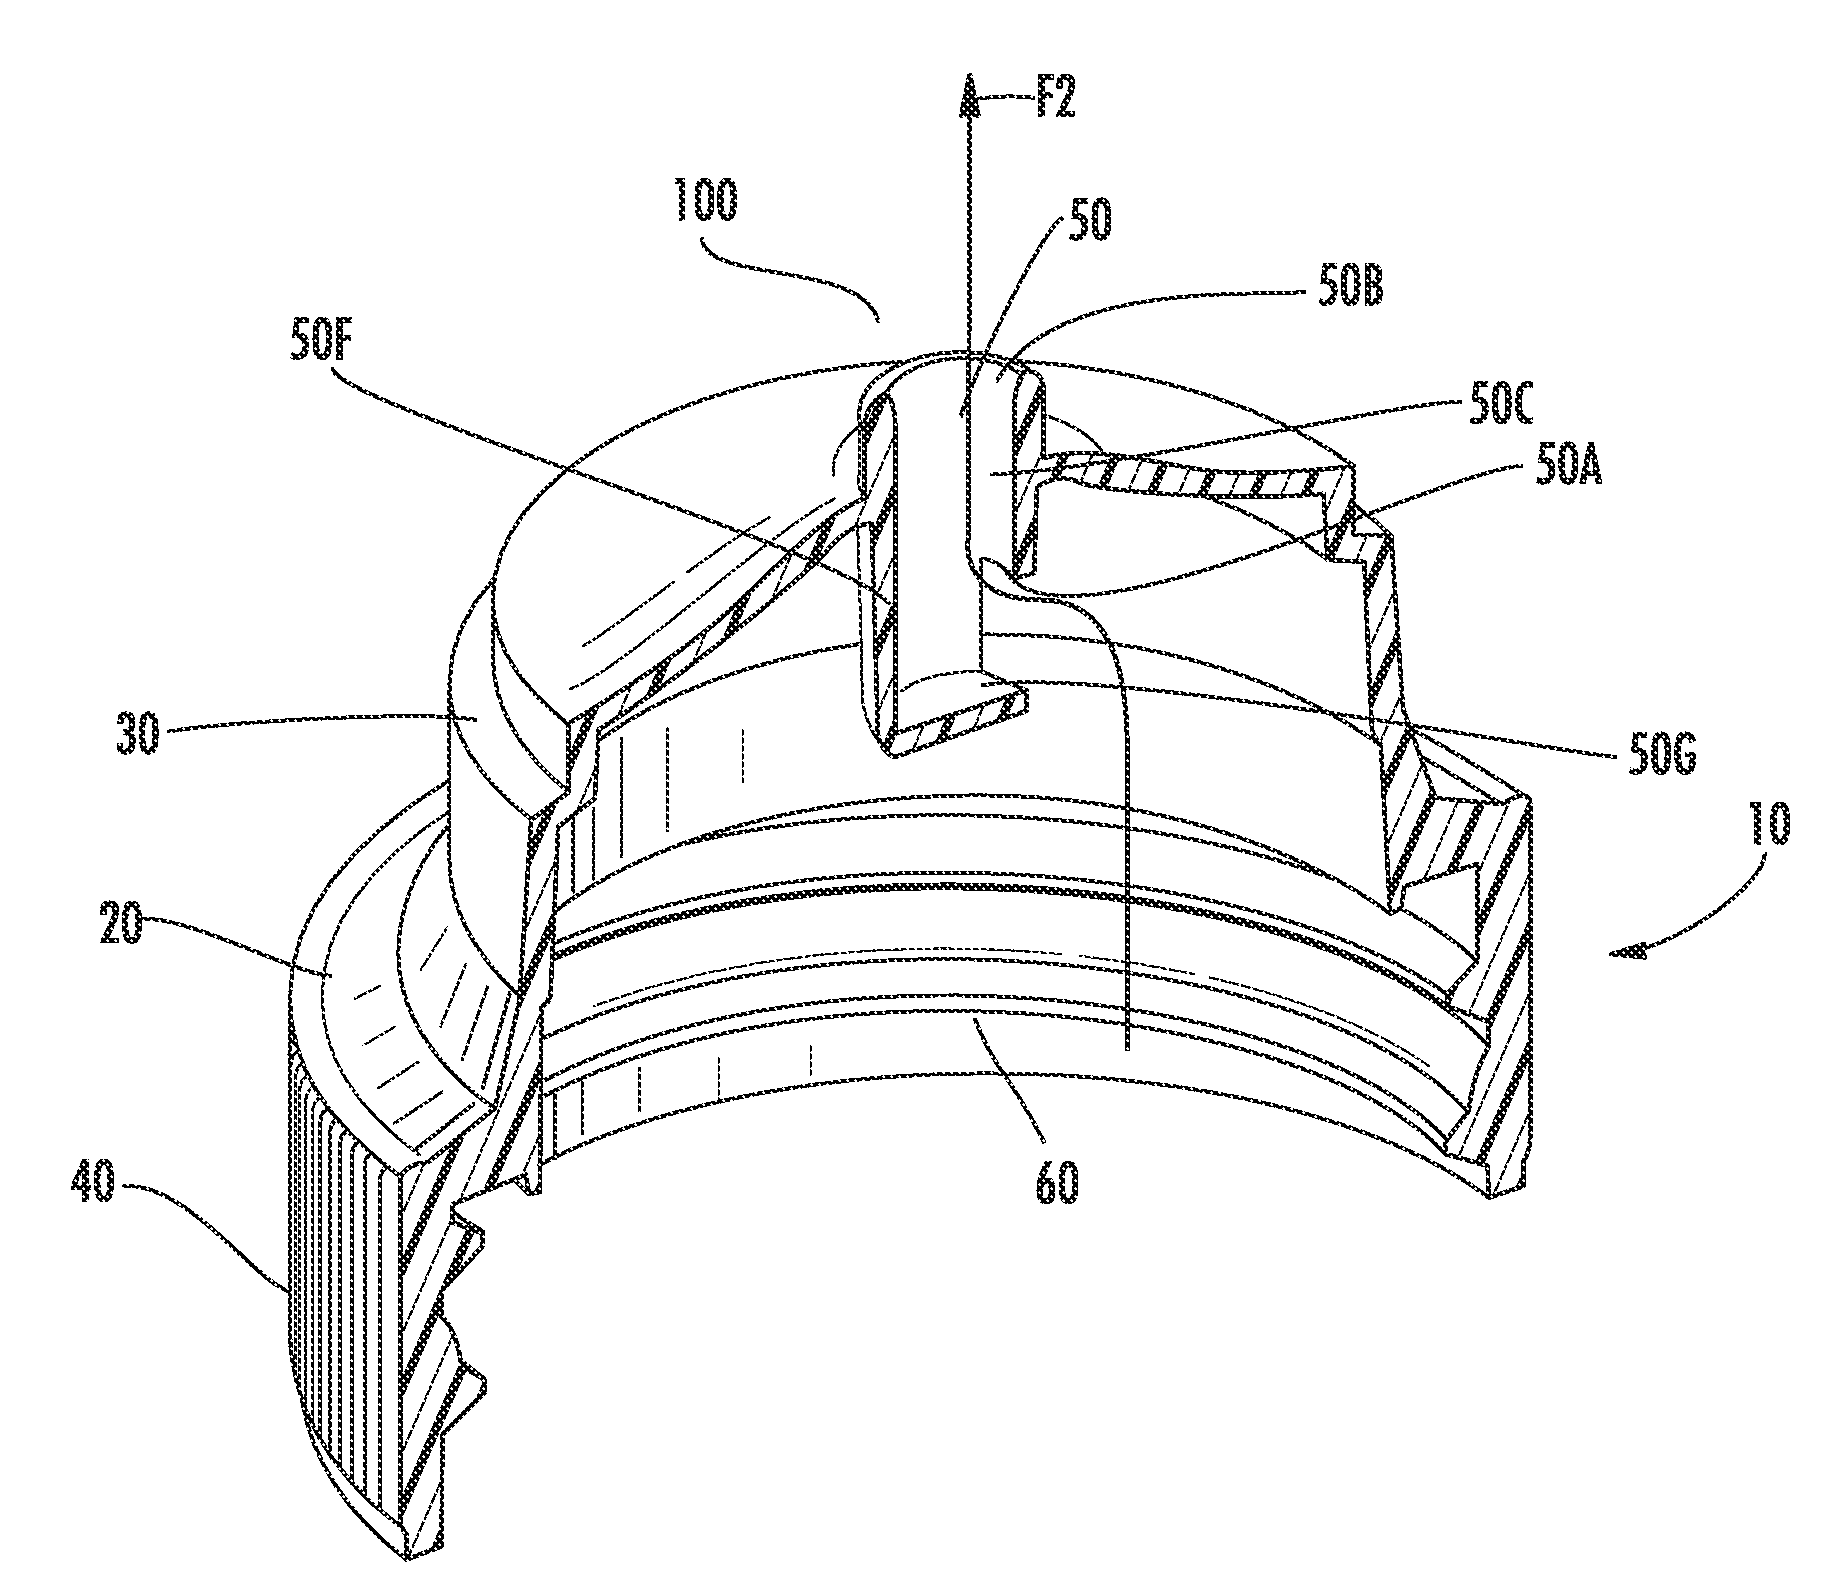 Dispensing closure with obstructed, offset, non-linear flow profile